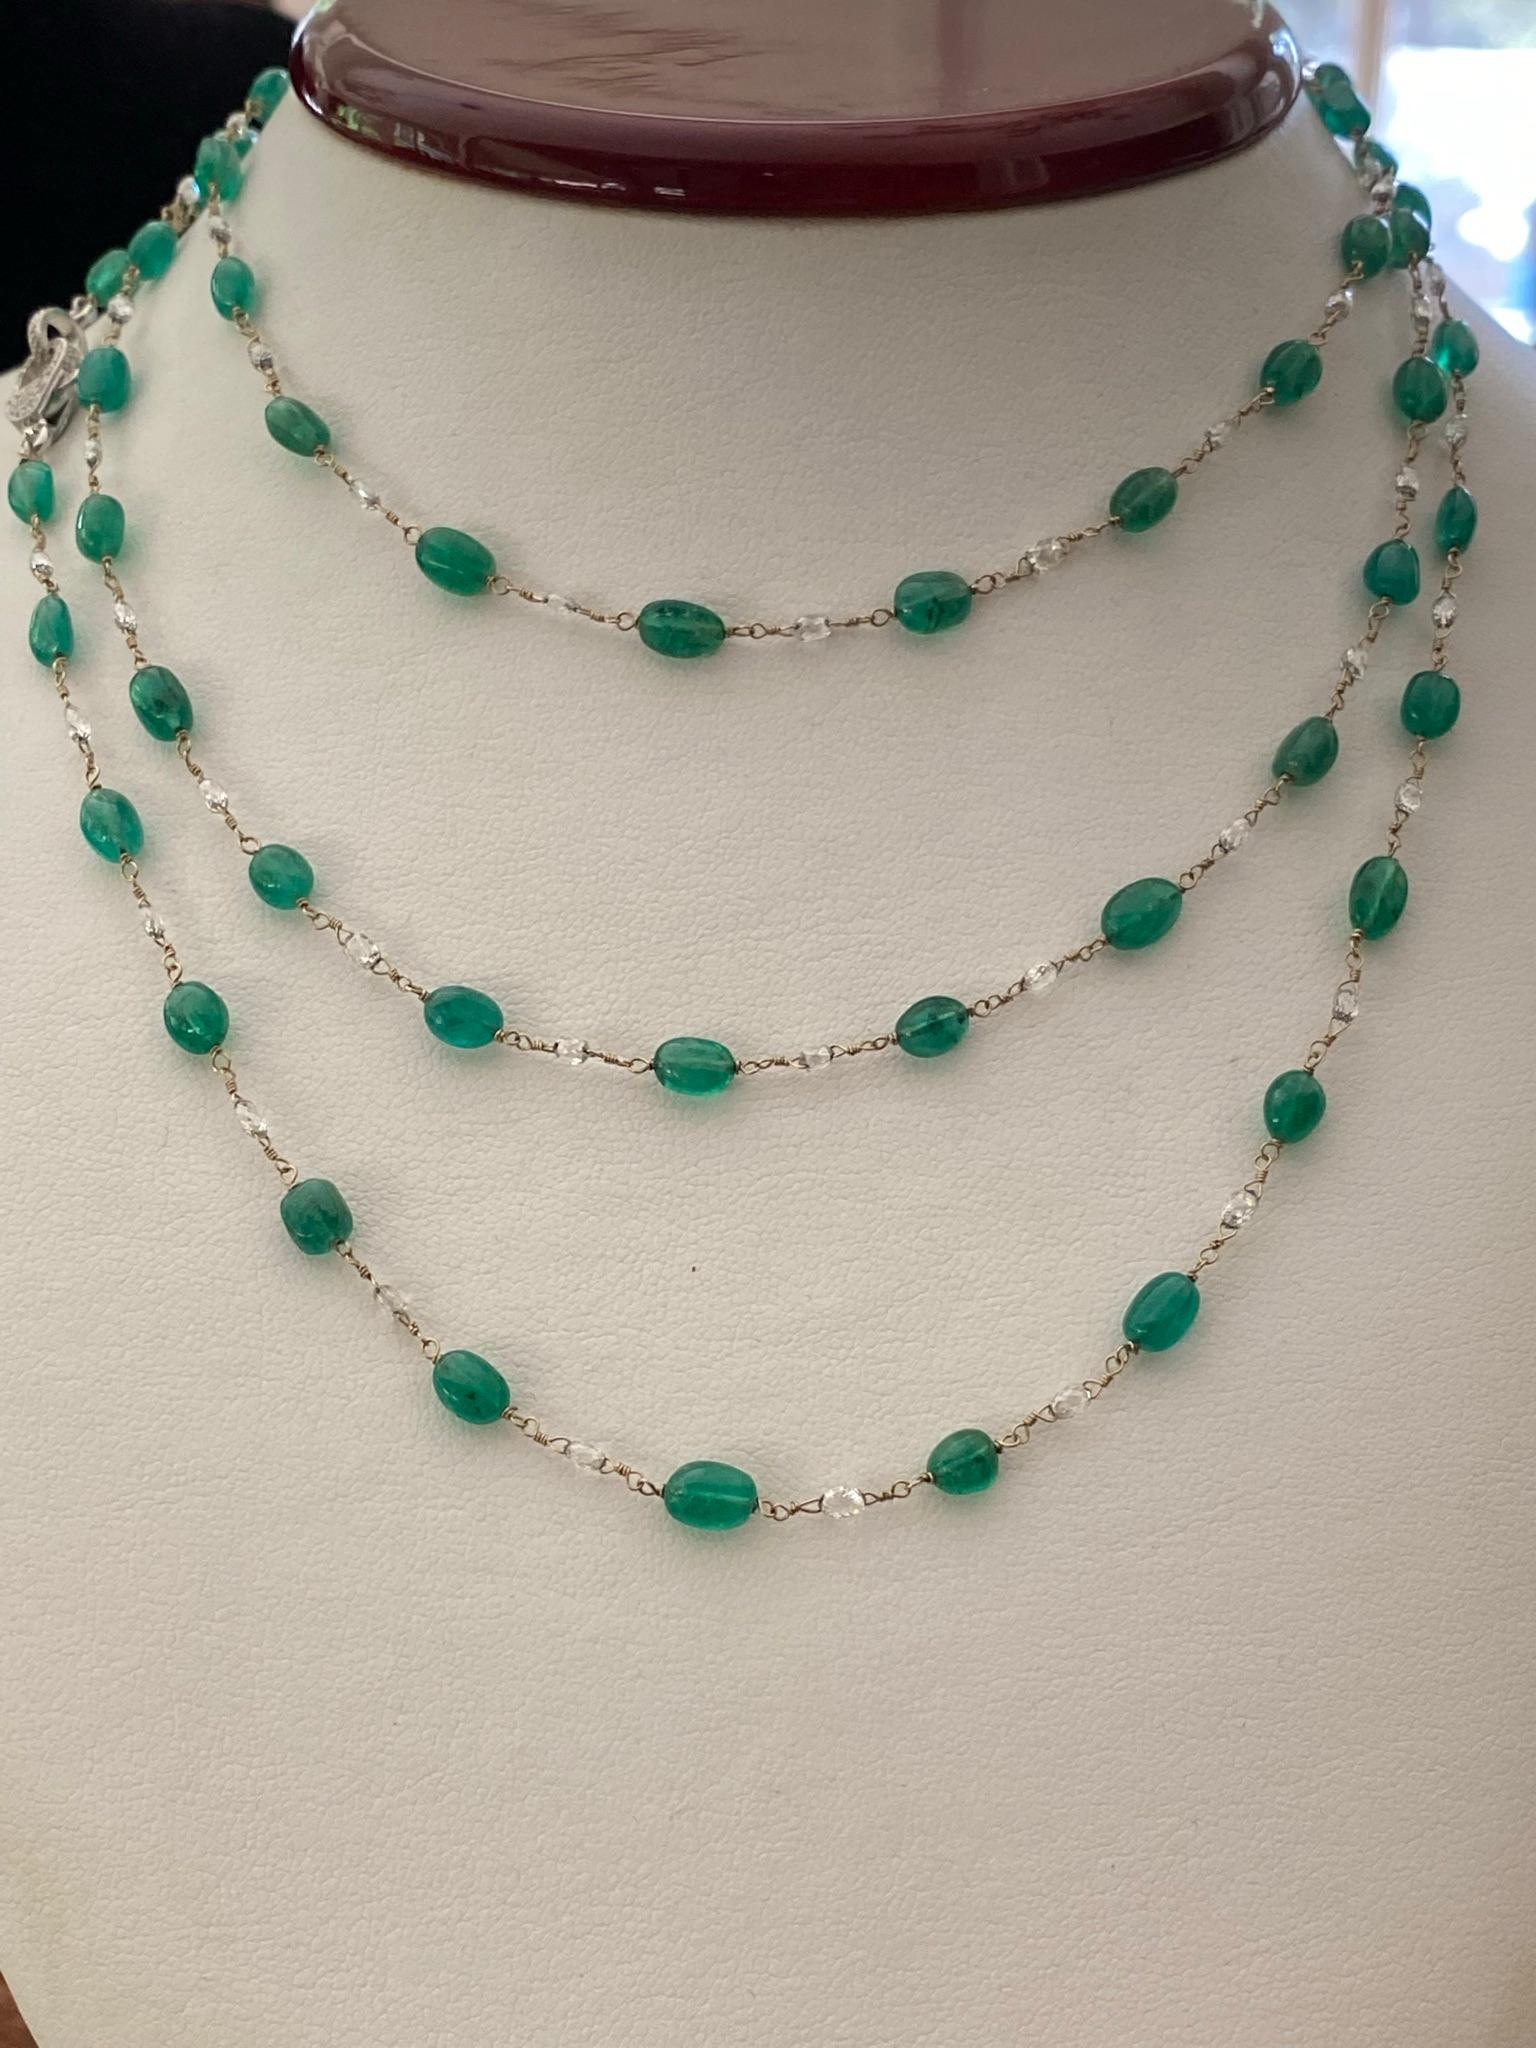 This magnificent vintage necklace is set with sixty-four natural green emeralds totaling 50.46 carats alternating between sixty-three naturally mined briolette-cut diamonds totaling 7.07 carats, GH color, VS-SI clarity. The necklace measures 48